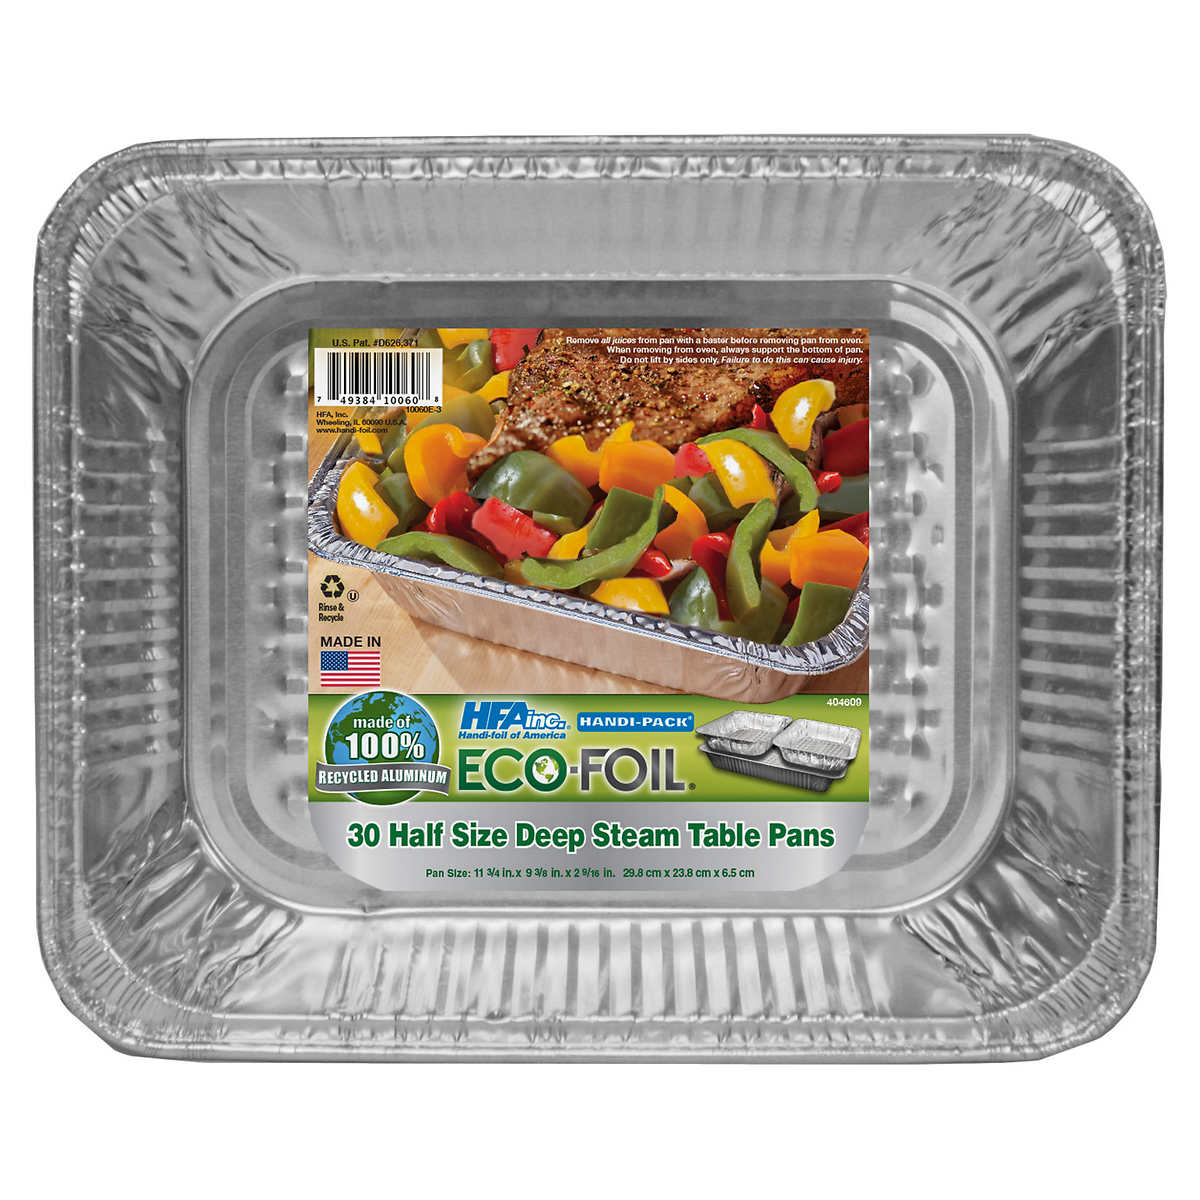 1 Piece of Aluminum Foil Foil Packaging for Restaurant, Deli, Catering,  Food Truck, Cart, Takeout or